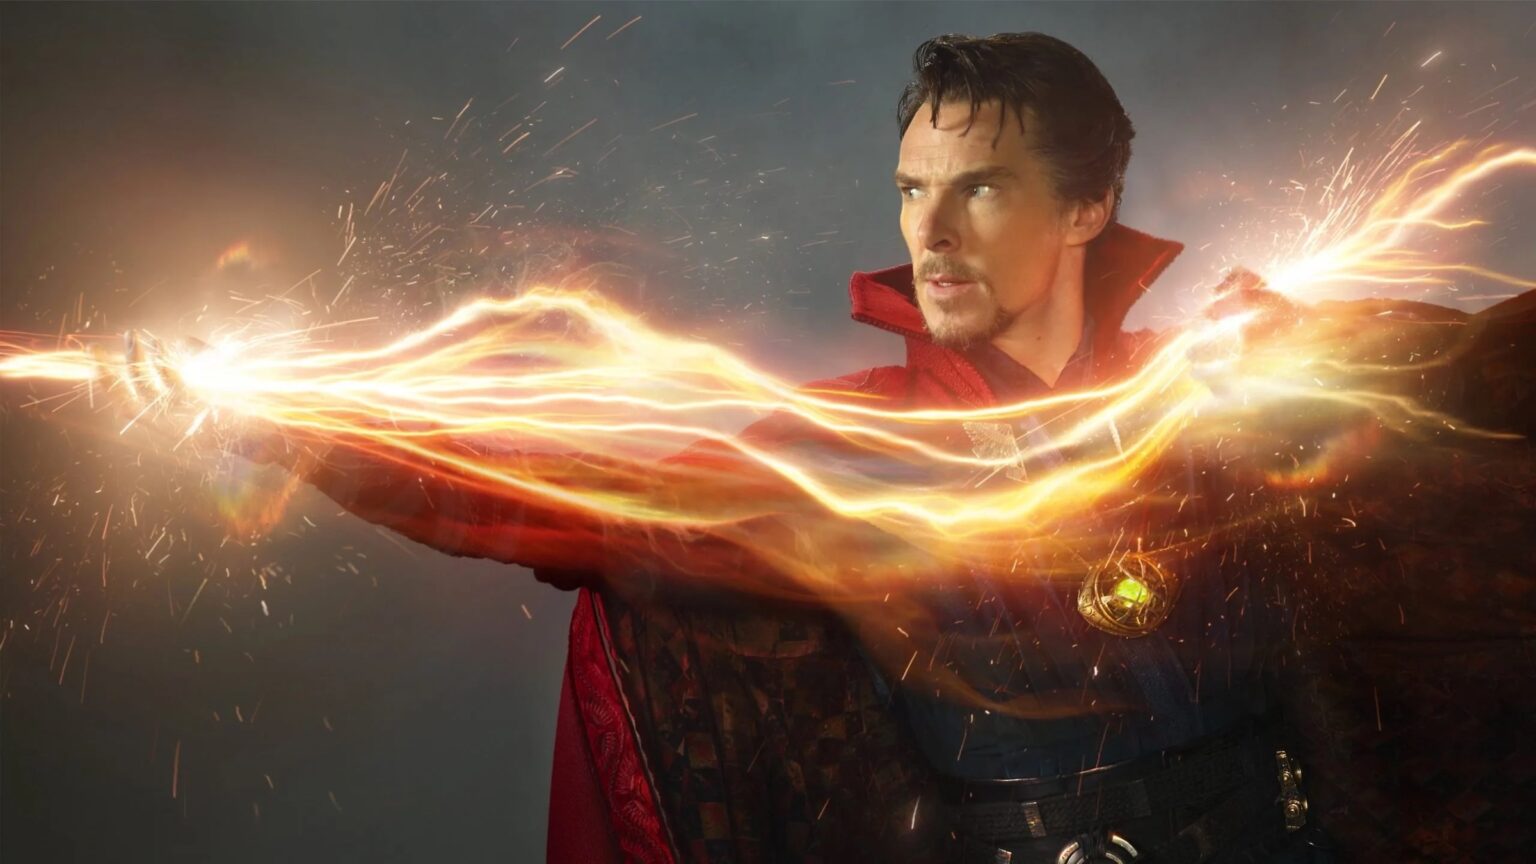 Is 'Doctor Strange in the Multiverse of Madness' available to stream? Here's how you can watch the new Marvel movie online.